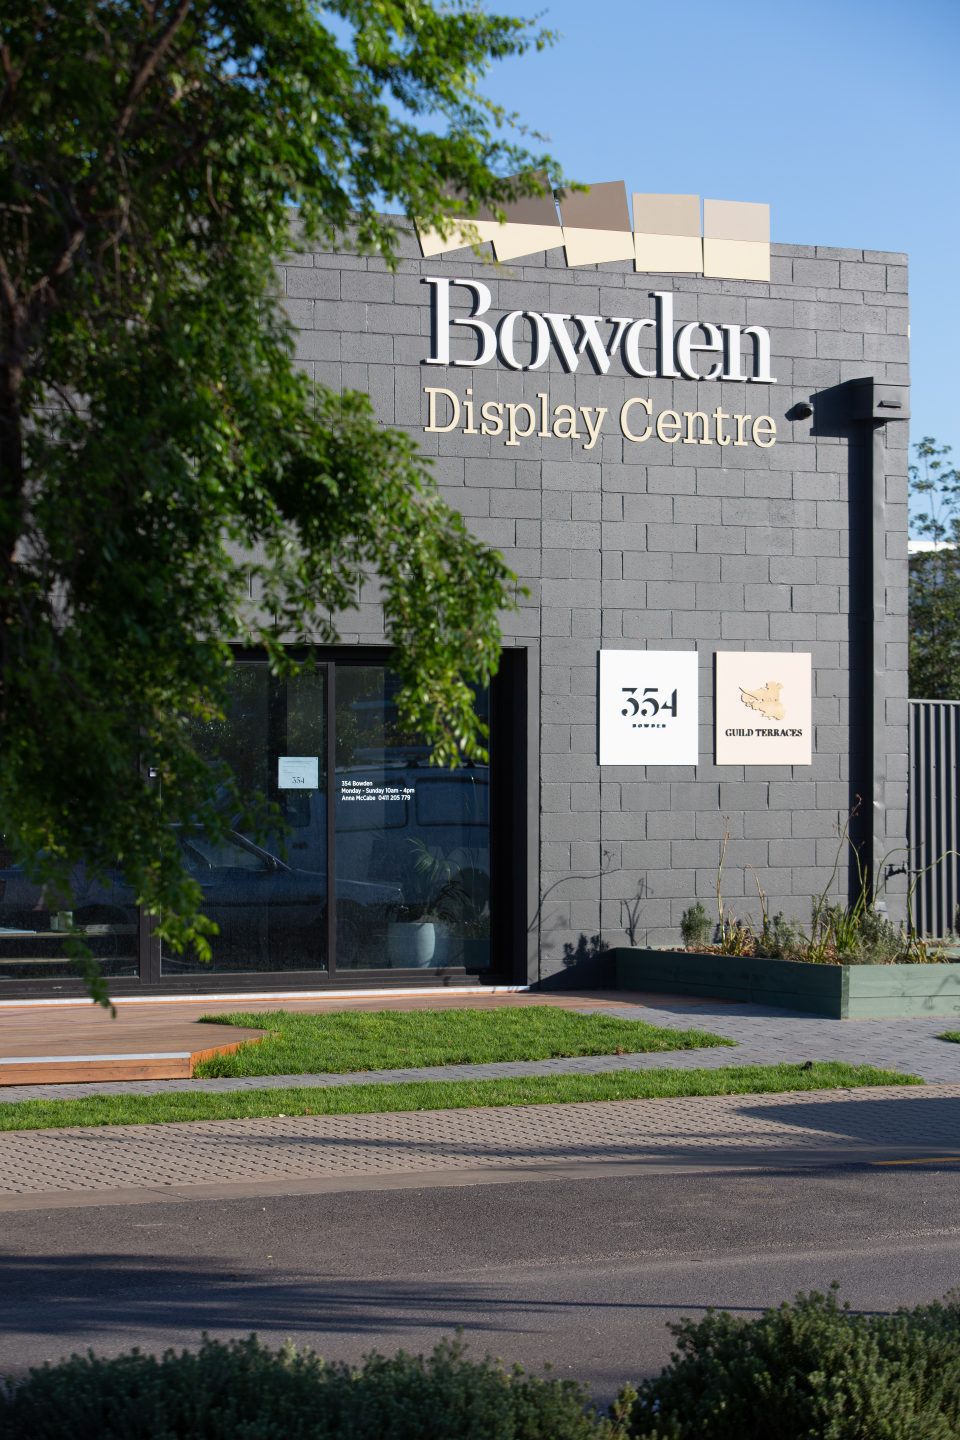 Bowden’s first display centre launches